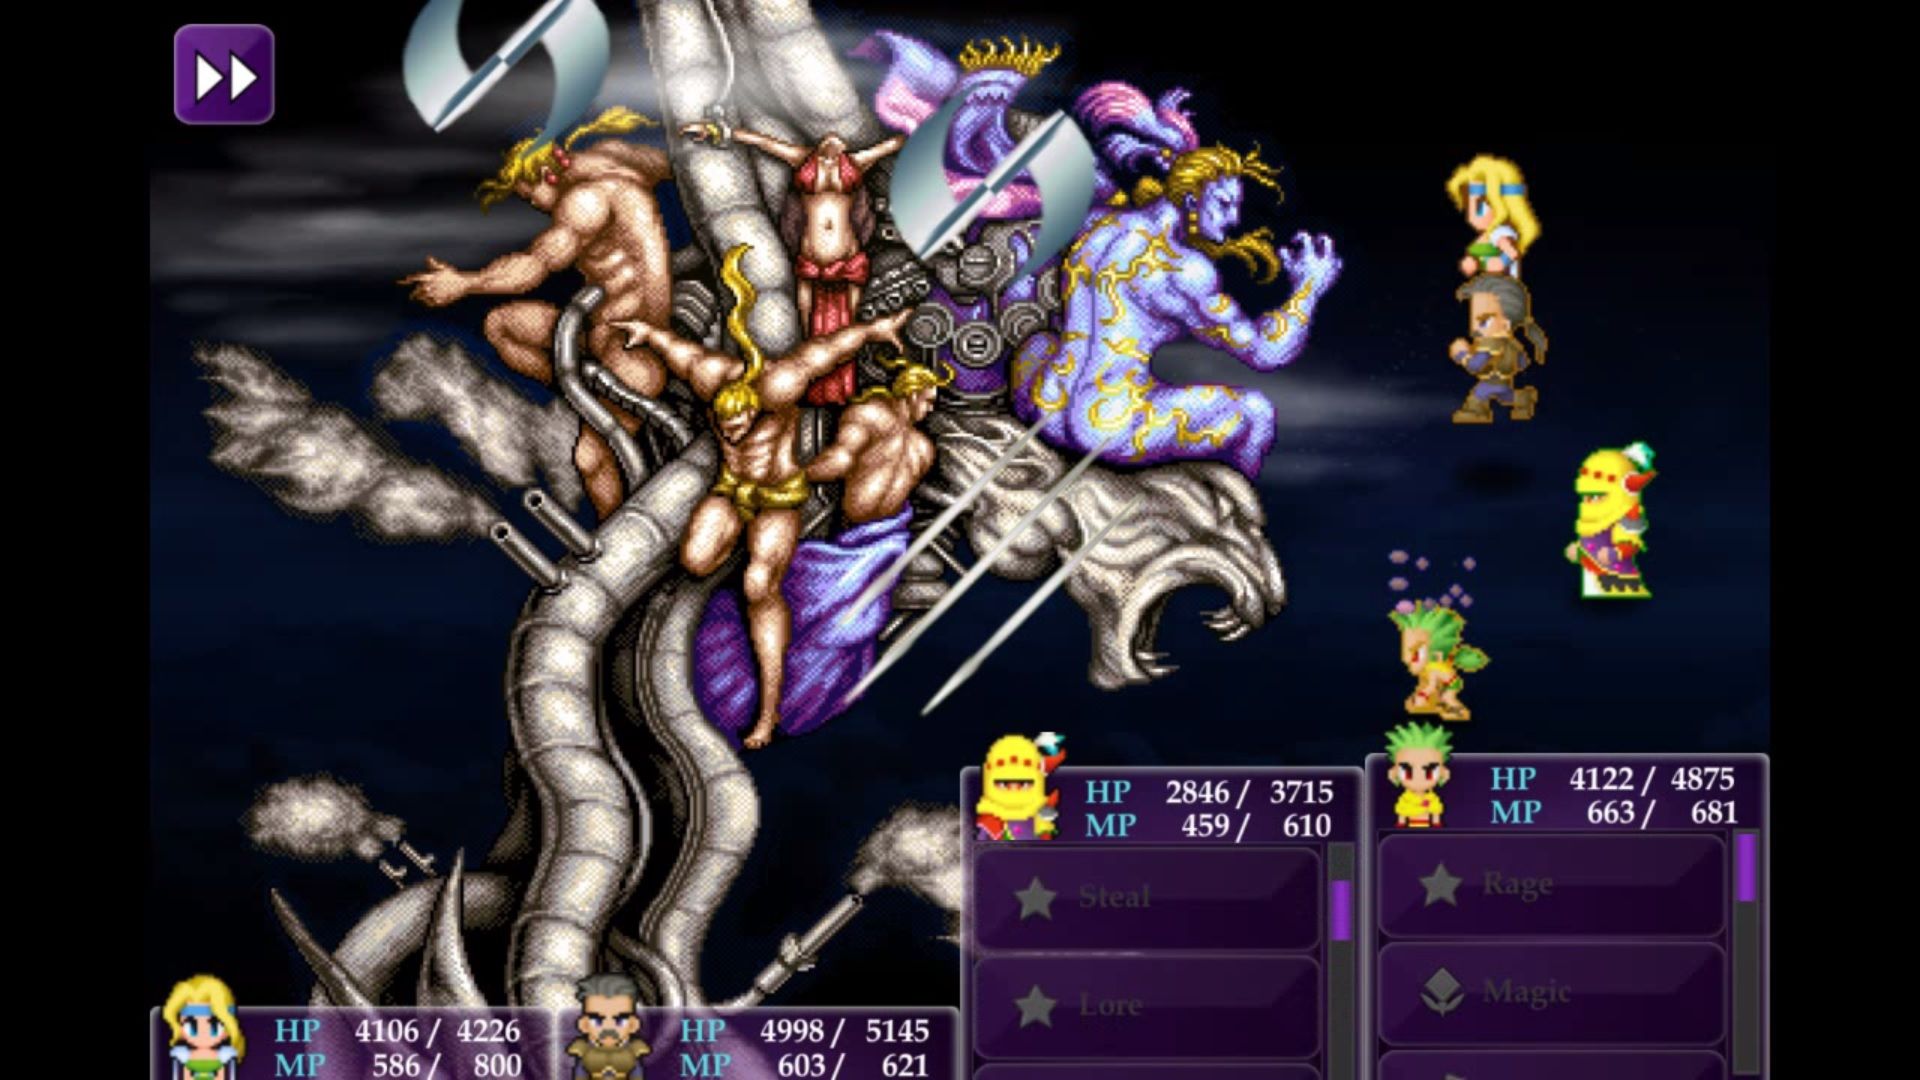 Final Fantasy The 10 Worst Things Kefka Has Done